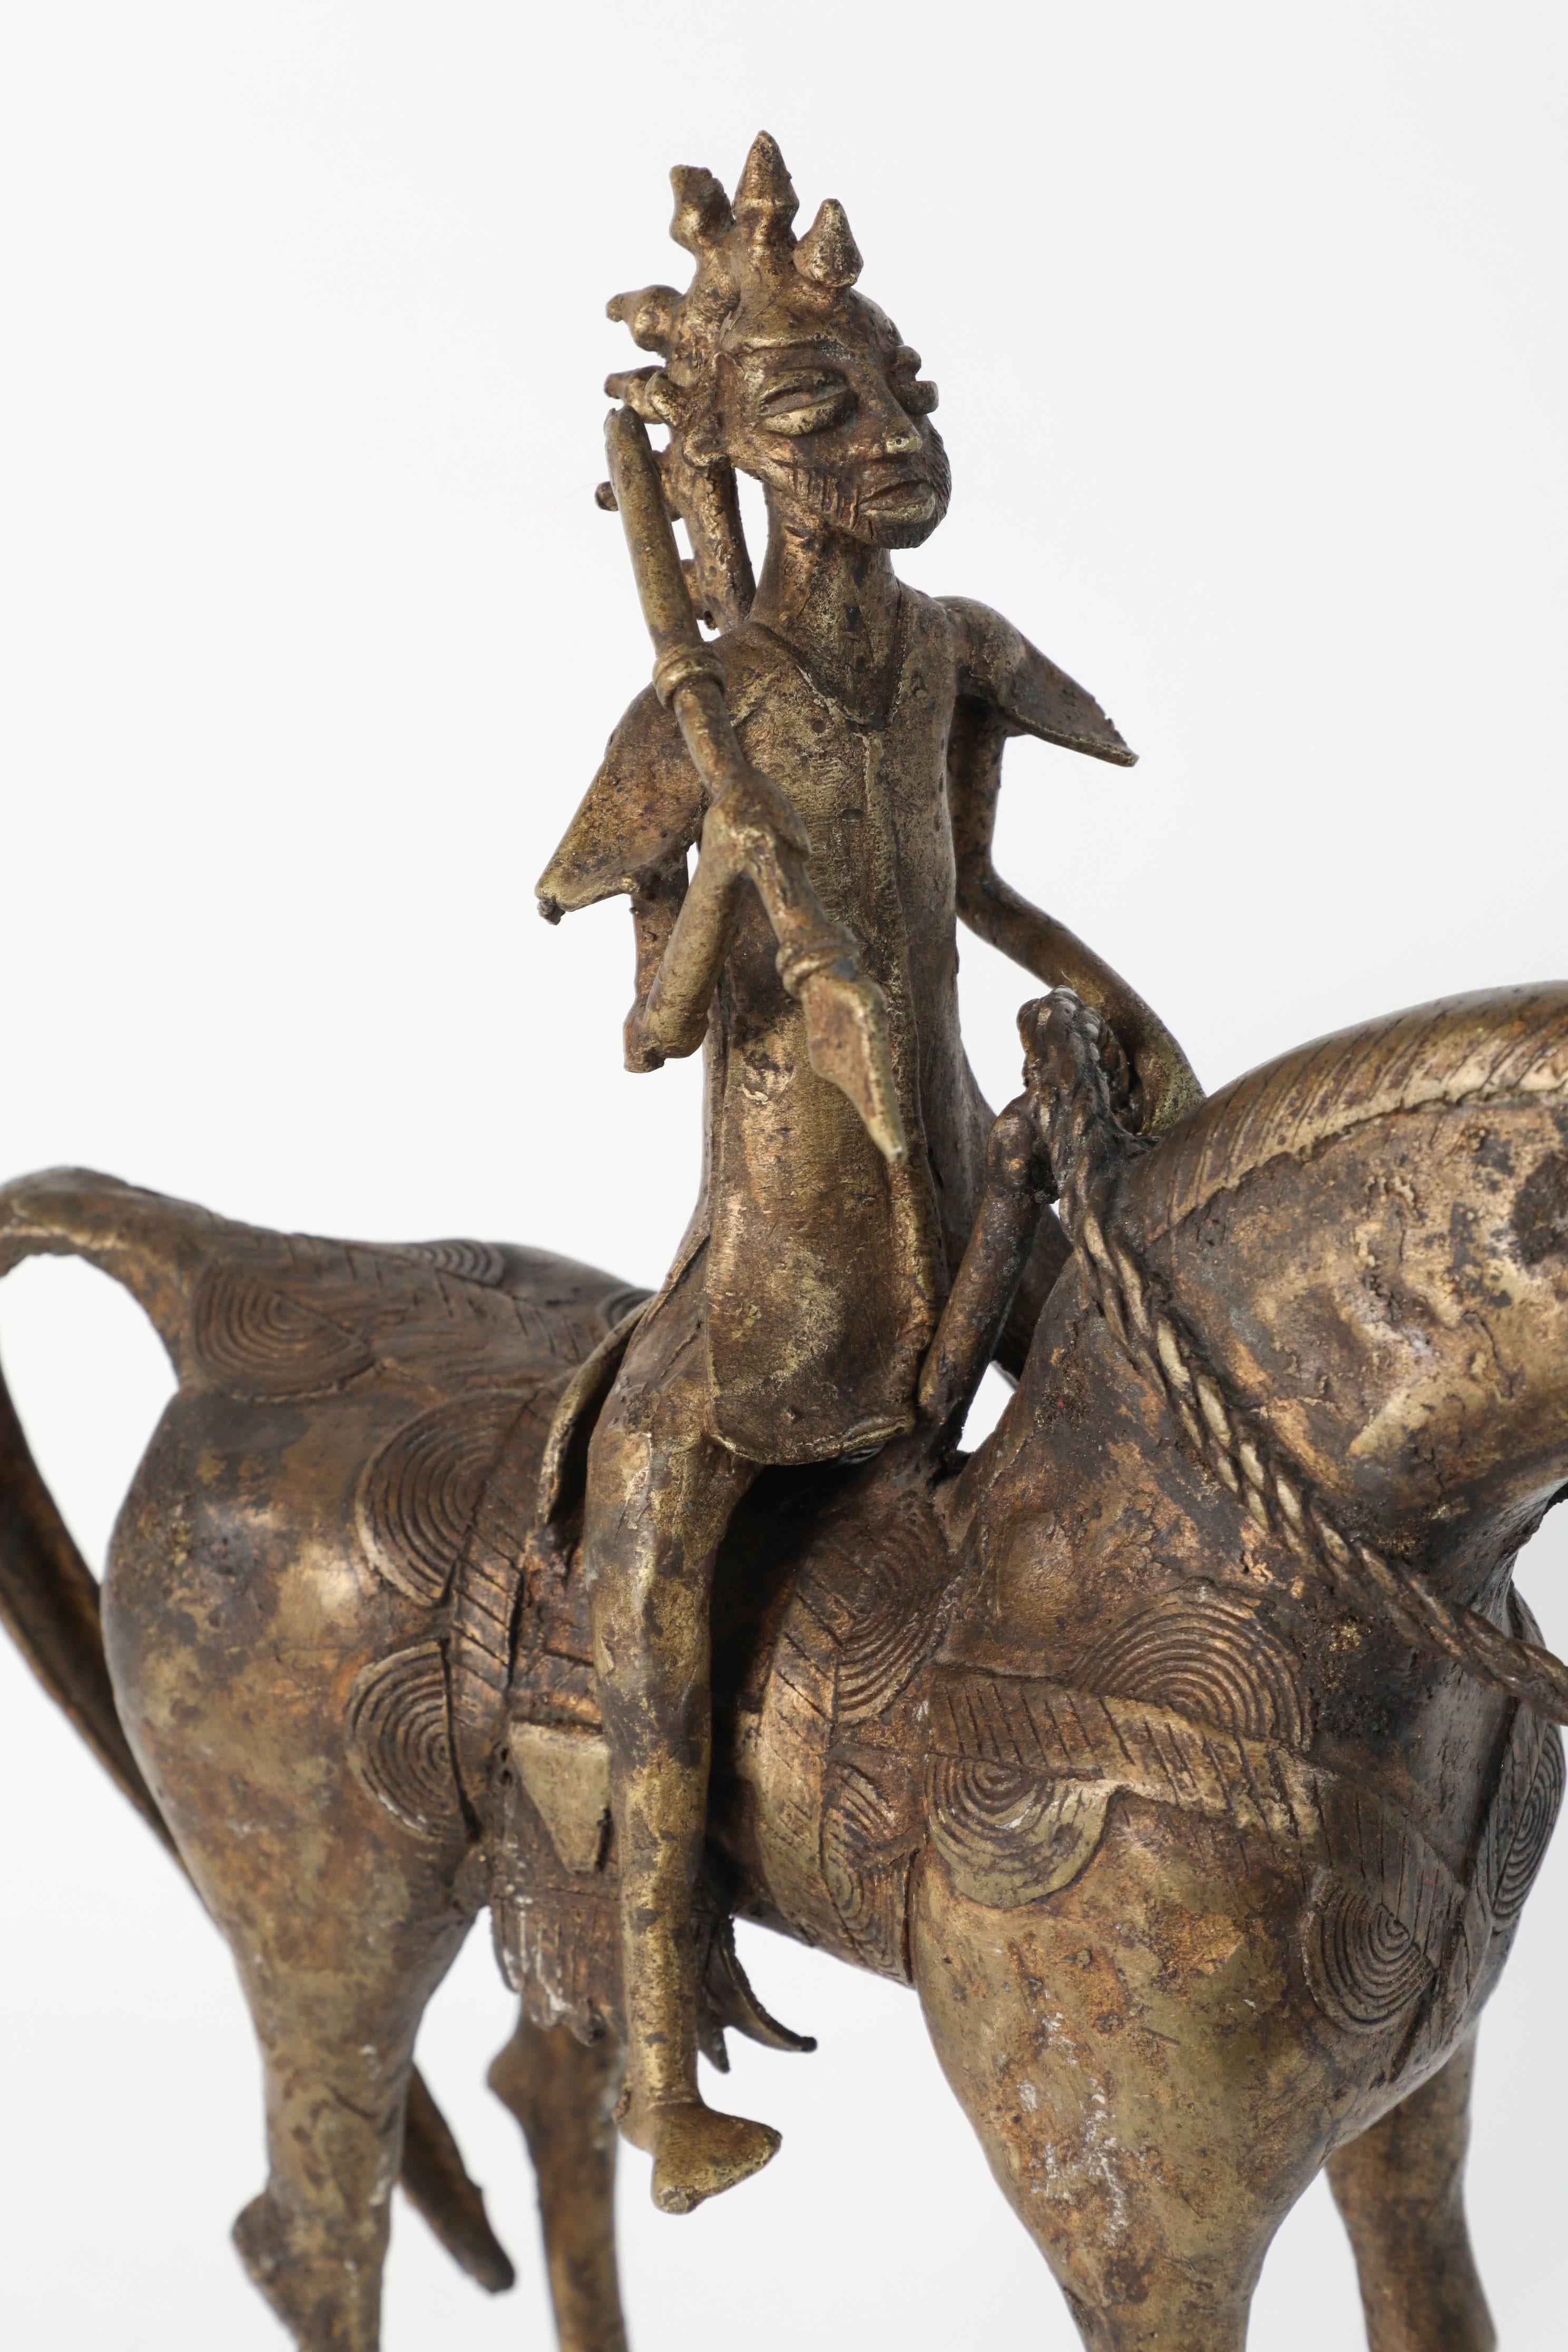 Wonderful decorative and heavy cast brass of an African horse rider.
The horse and warrior are in the style of the Dogon tribe with very modern tribal elongated form.
Measures: Height 17” 5 inches x width 15 inches x depth 4.5 inches.
The tribal